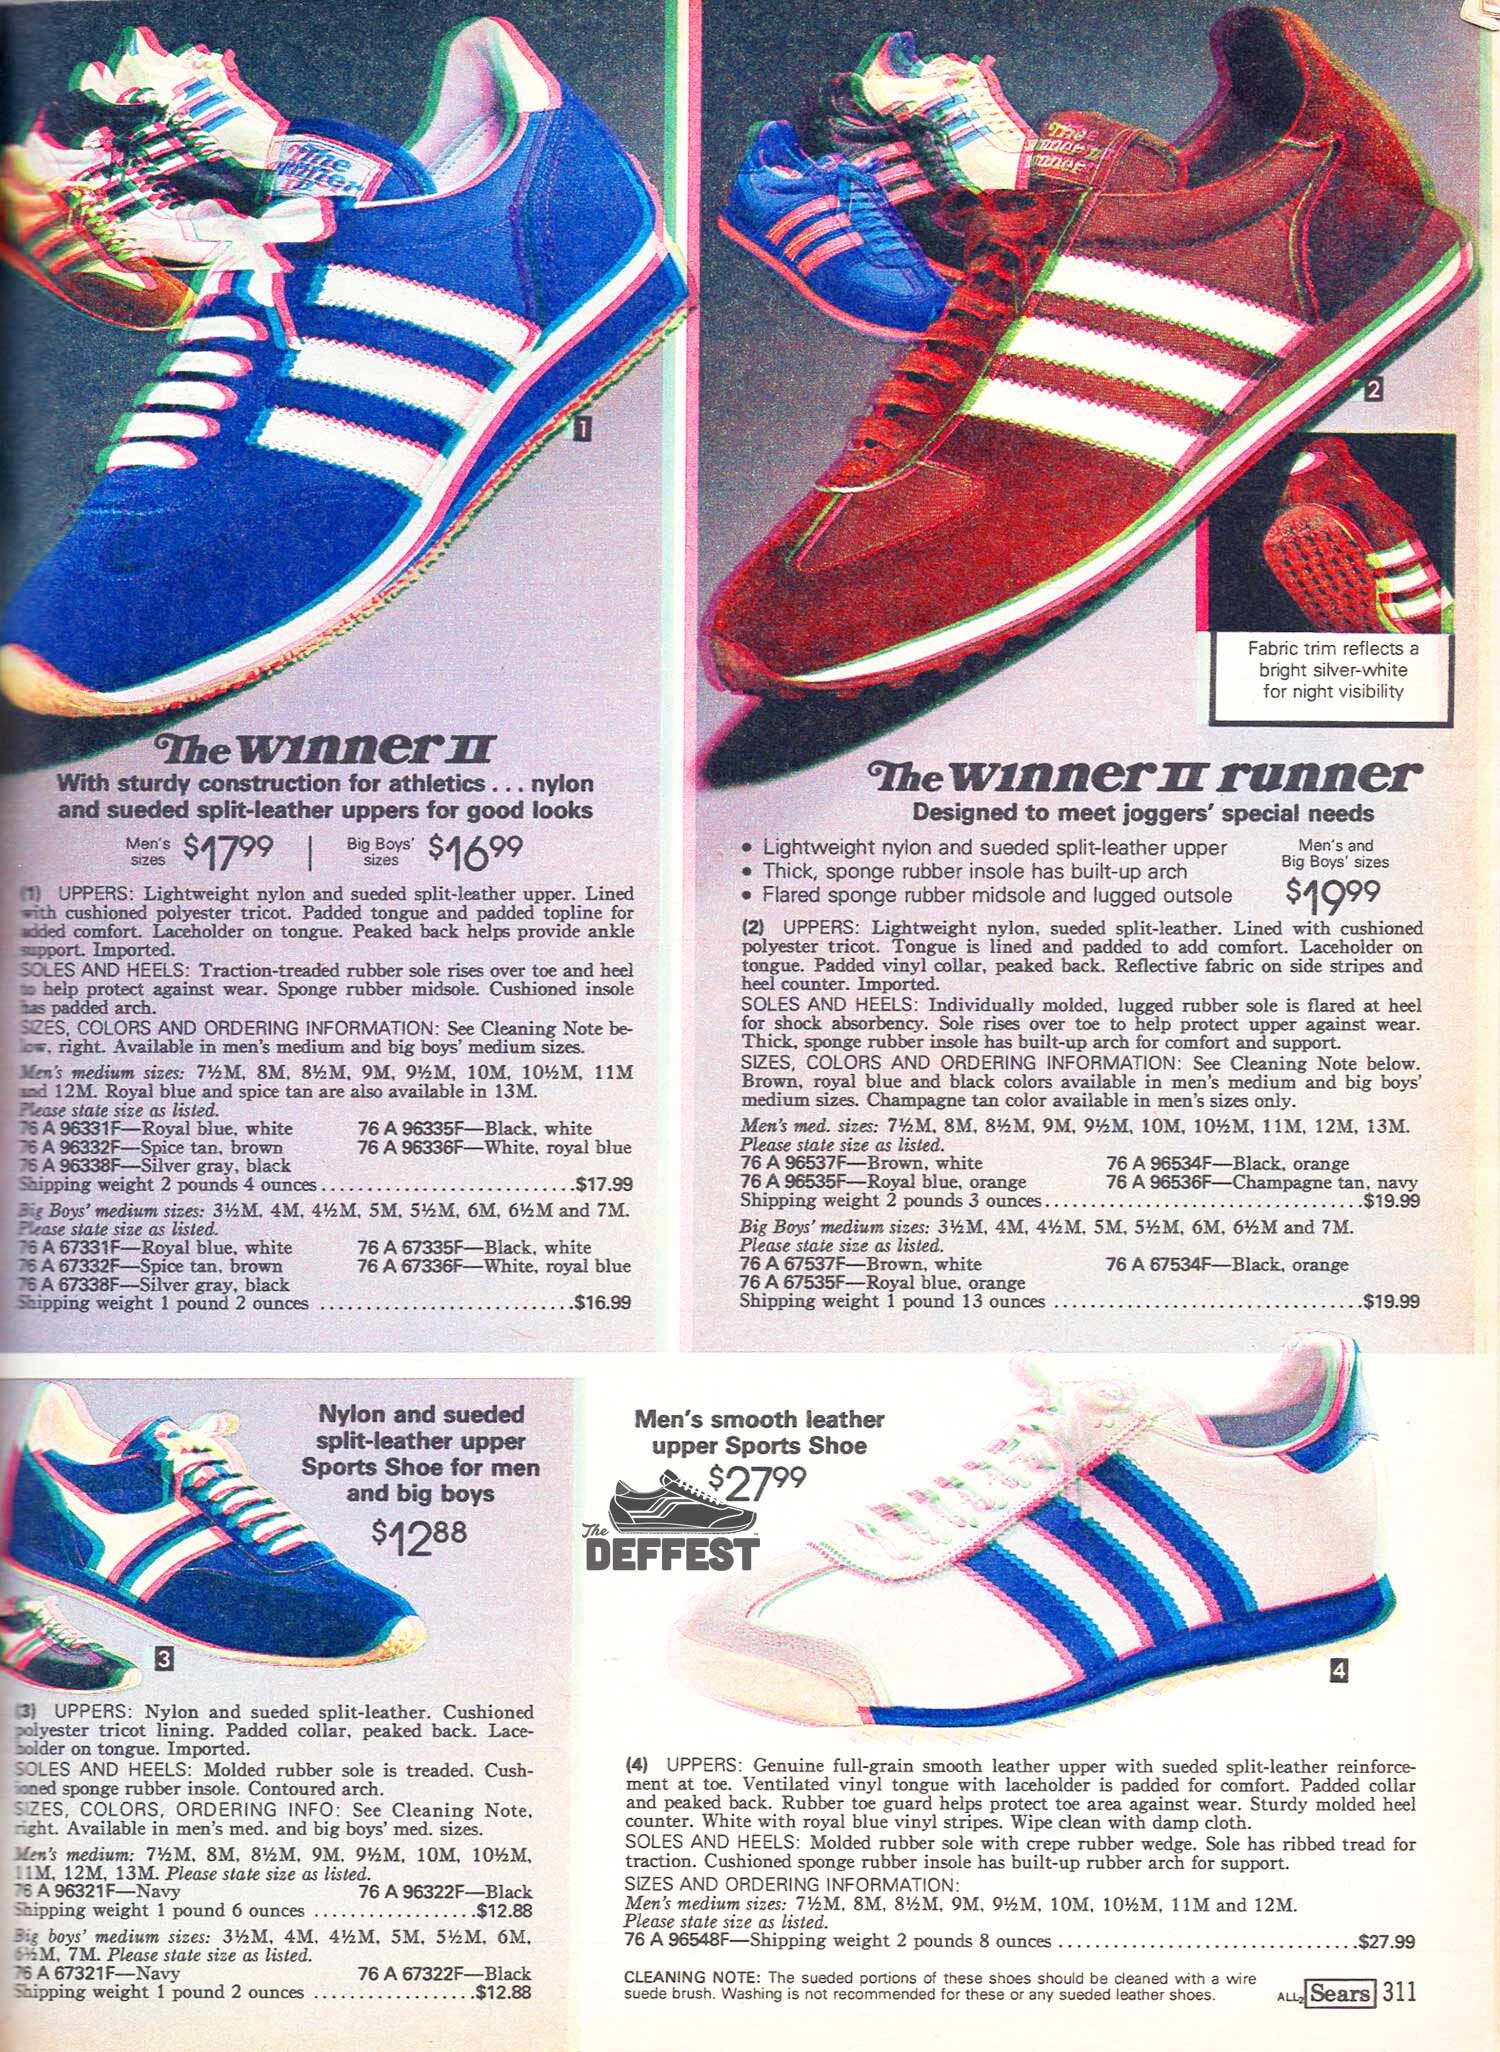 A vintage and retro sneaker blog 